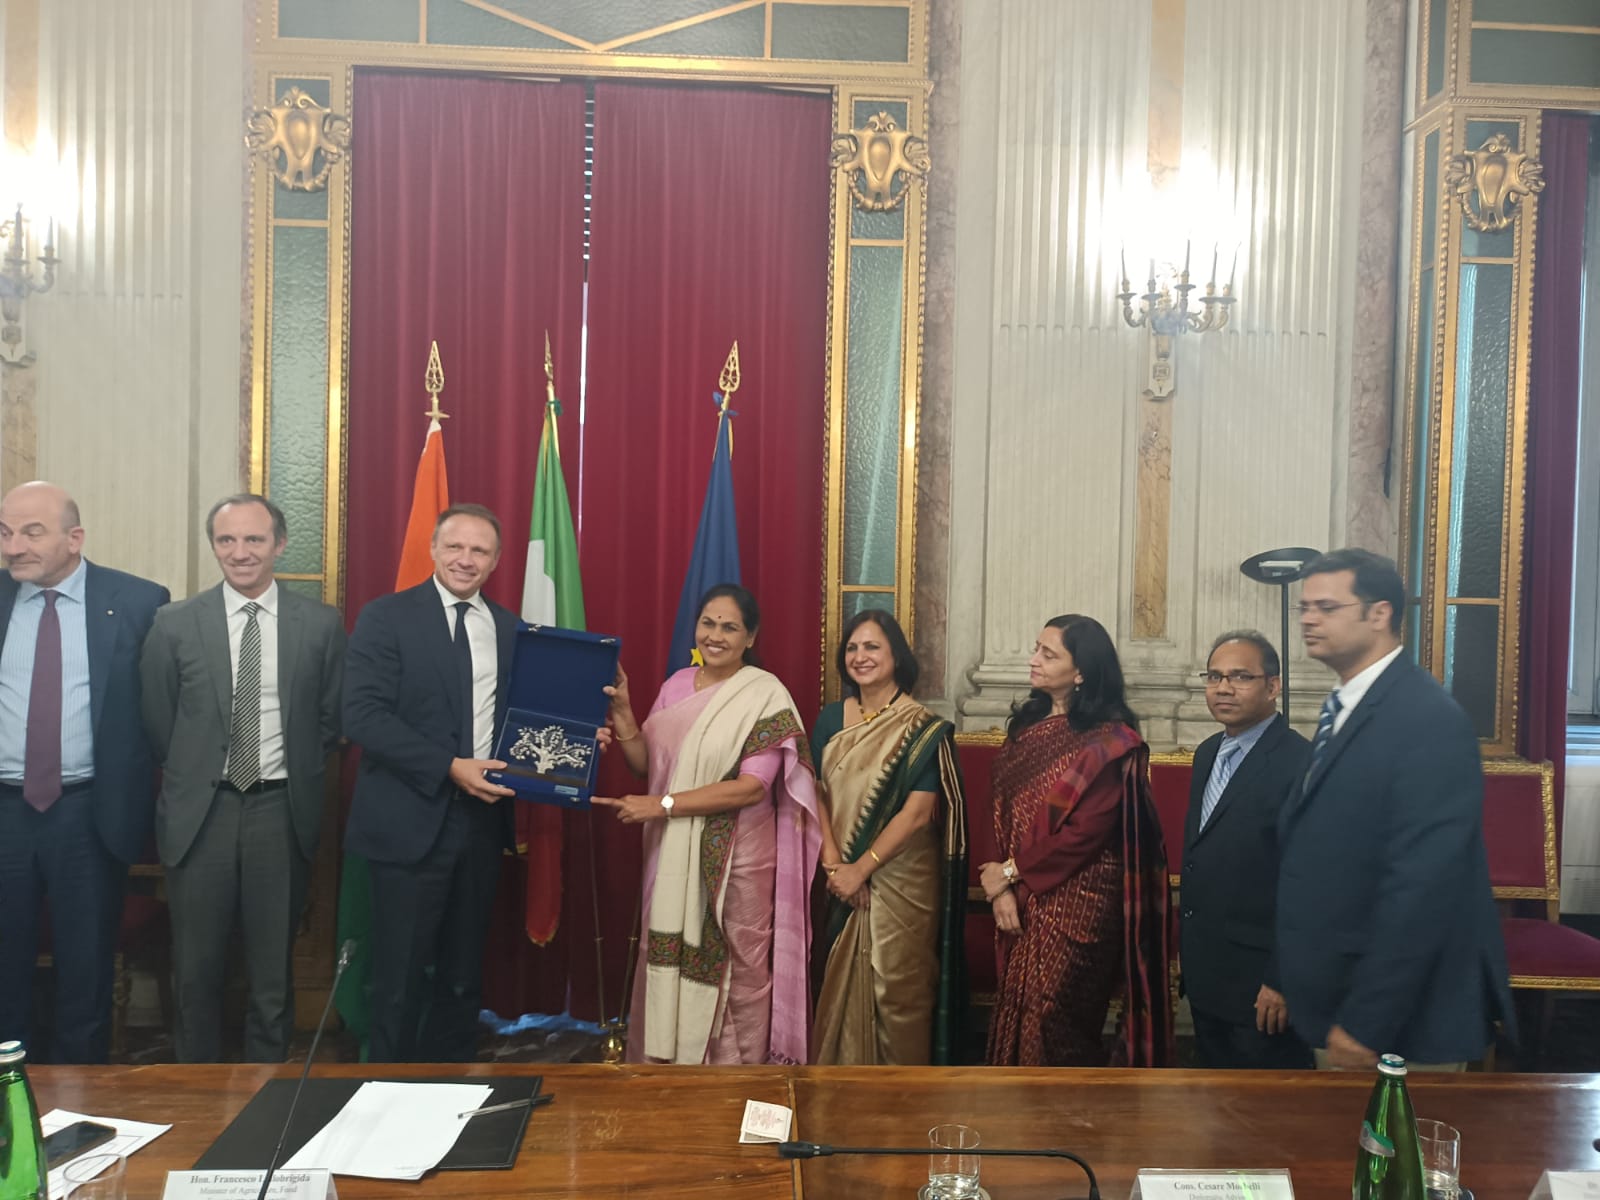 Meeting of Hon'ble Minister of State for Agriculture H.E. Ms. Shobha Karandlaje with Hon'ble Minister for Agriculture of Italy H.E. Mr. Francesco Lollobrigida 